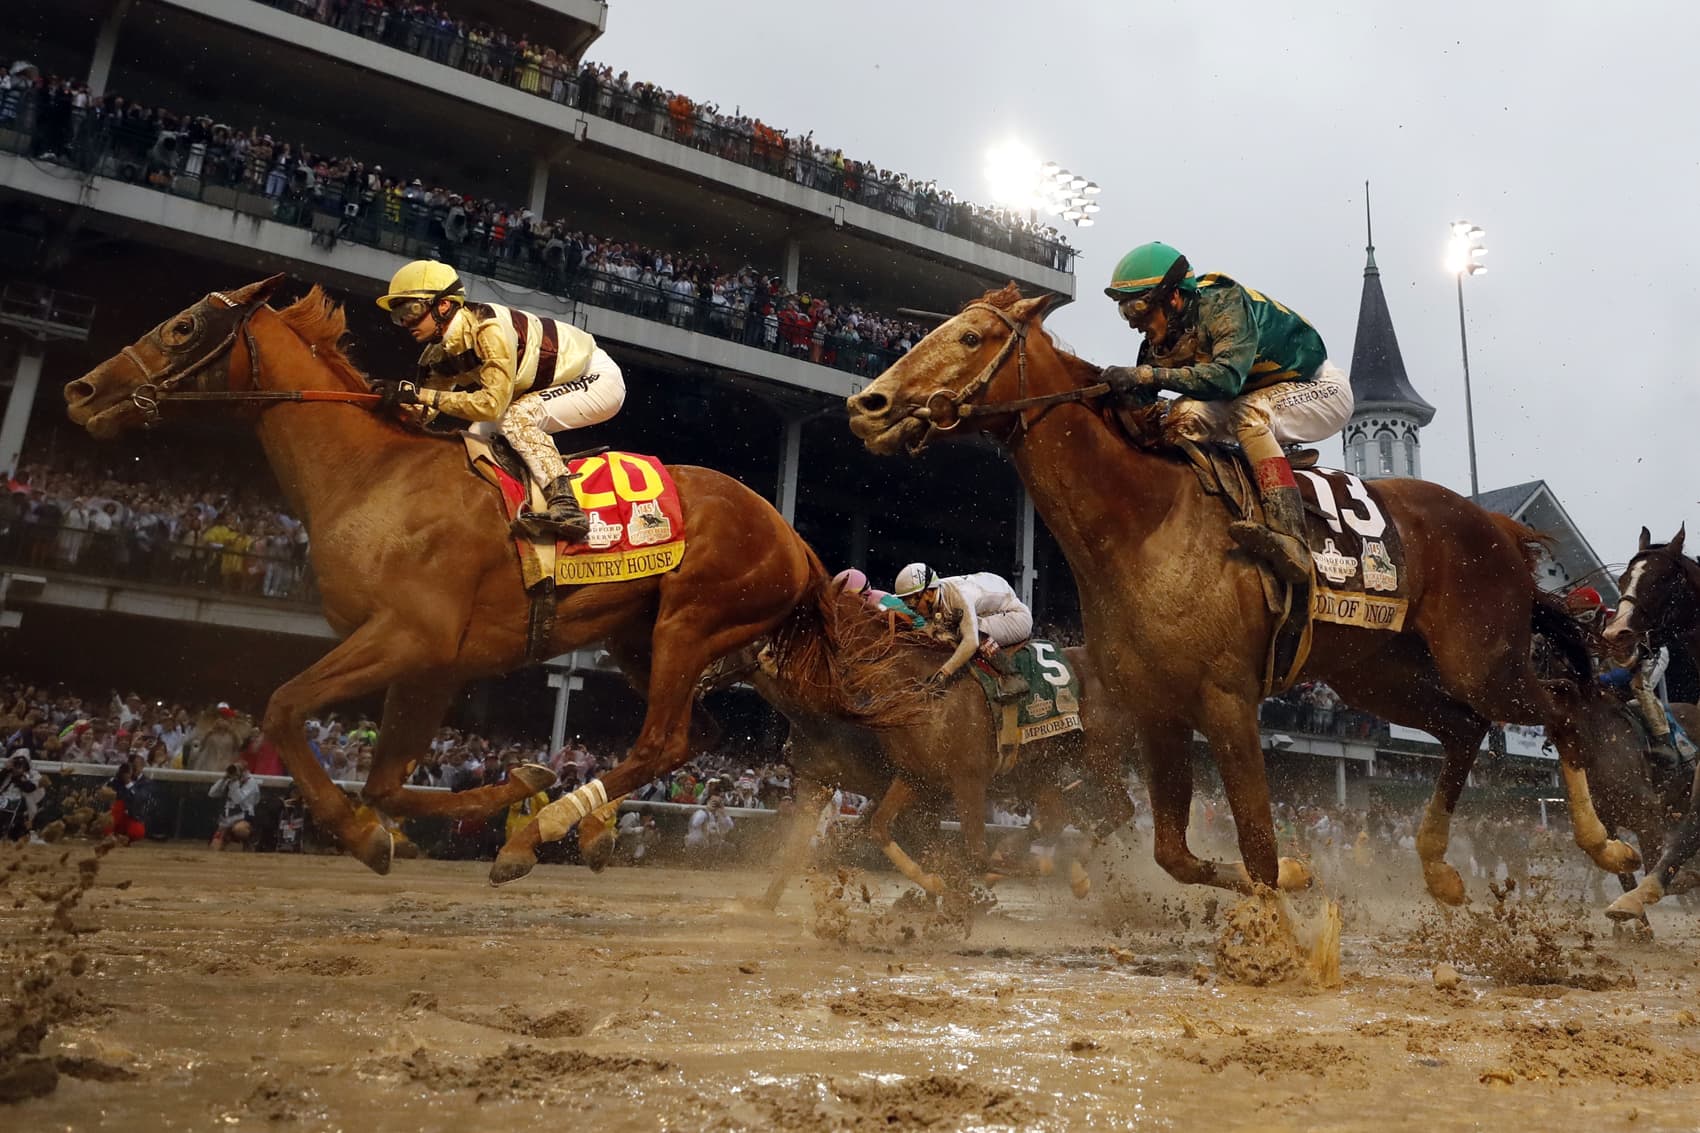 Kentucky Derby Chaos Is Horse Racing's Latest Stumble. What's Its